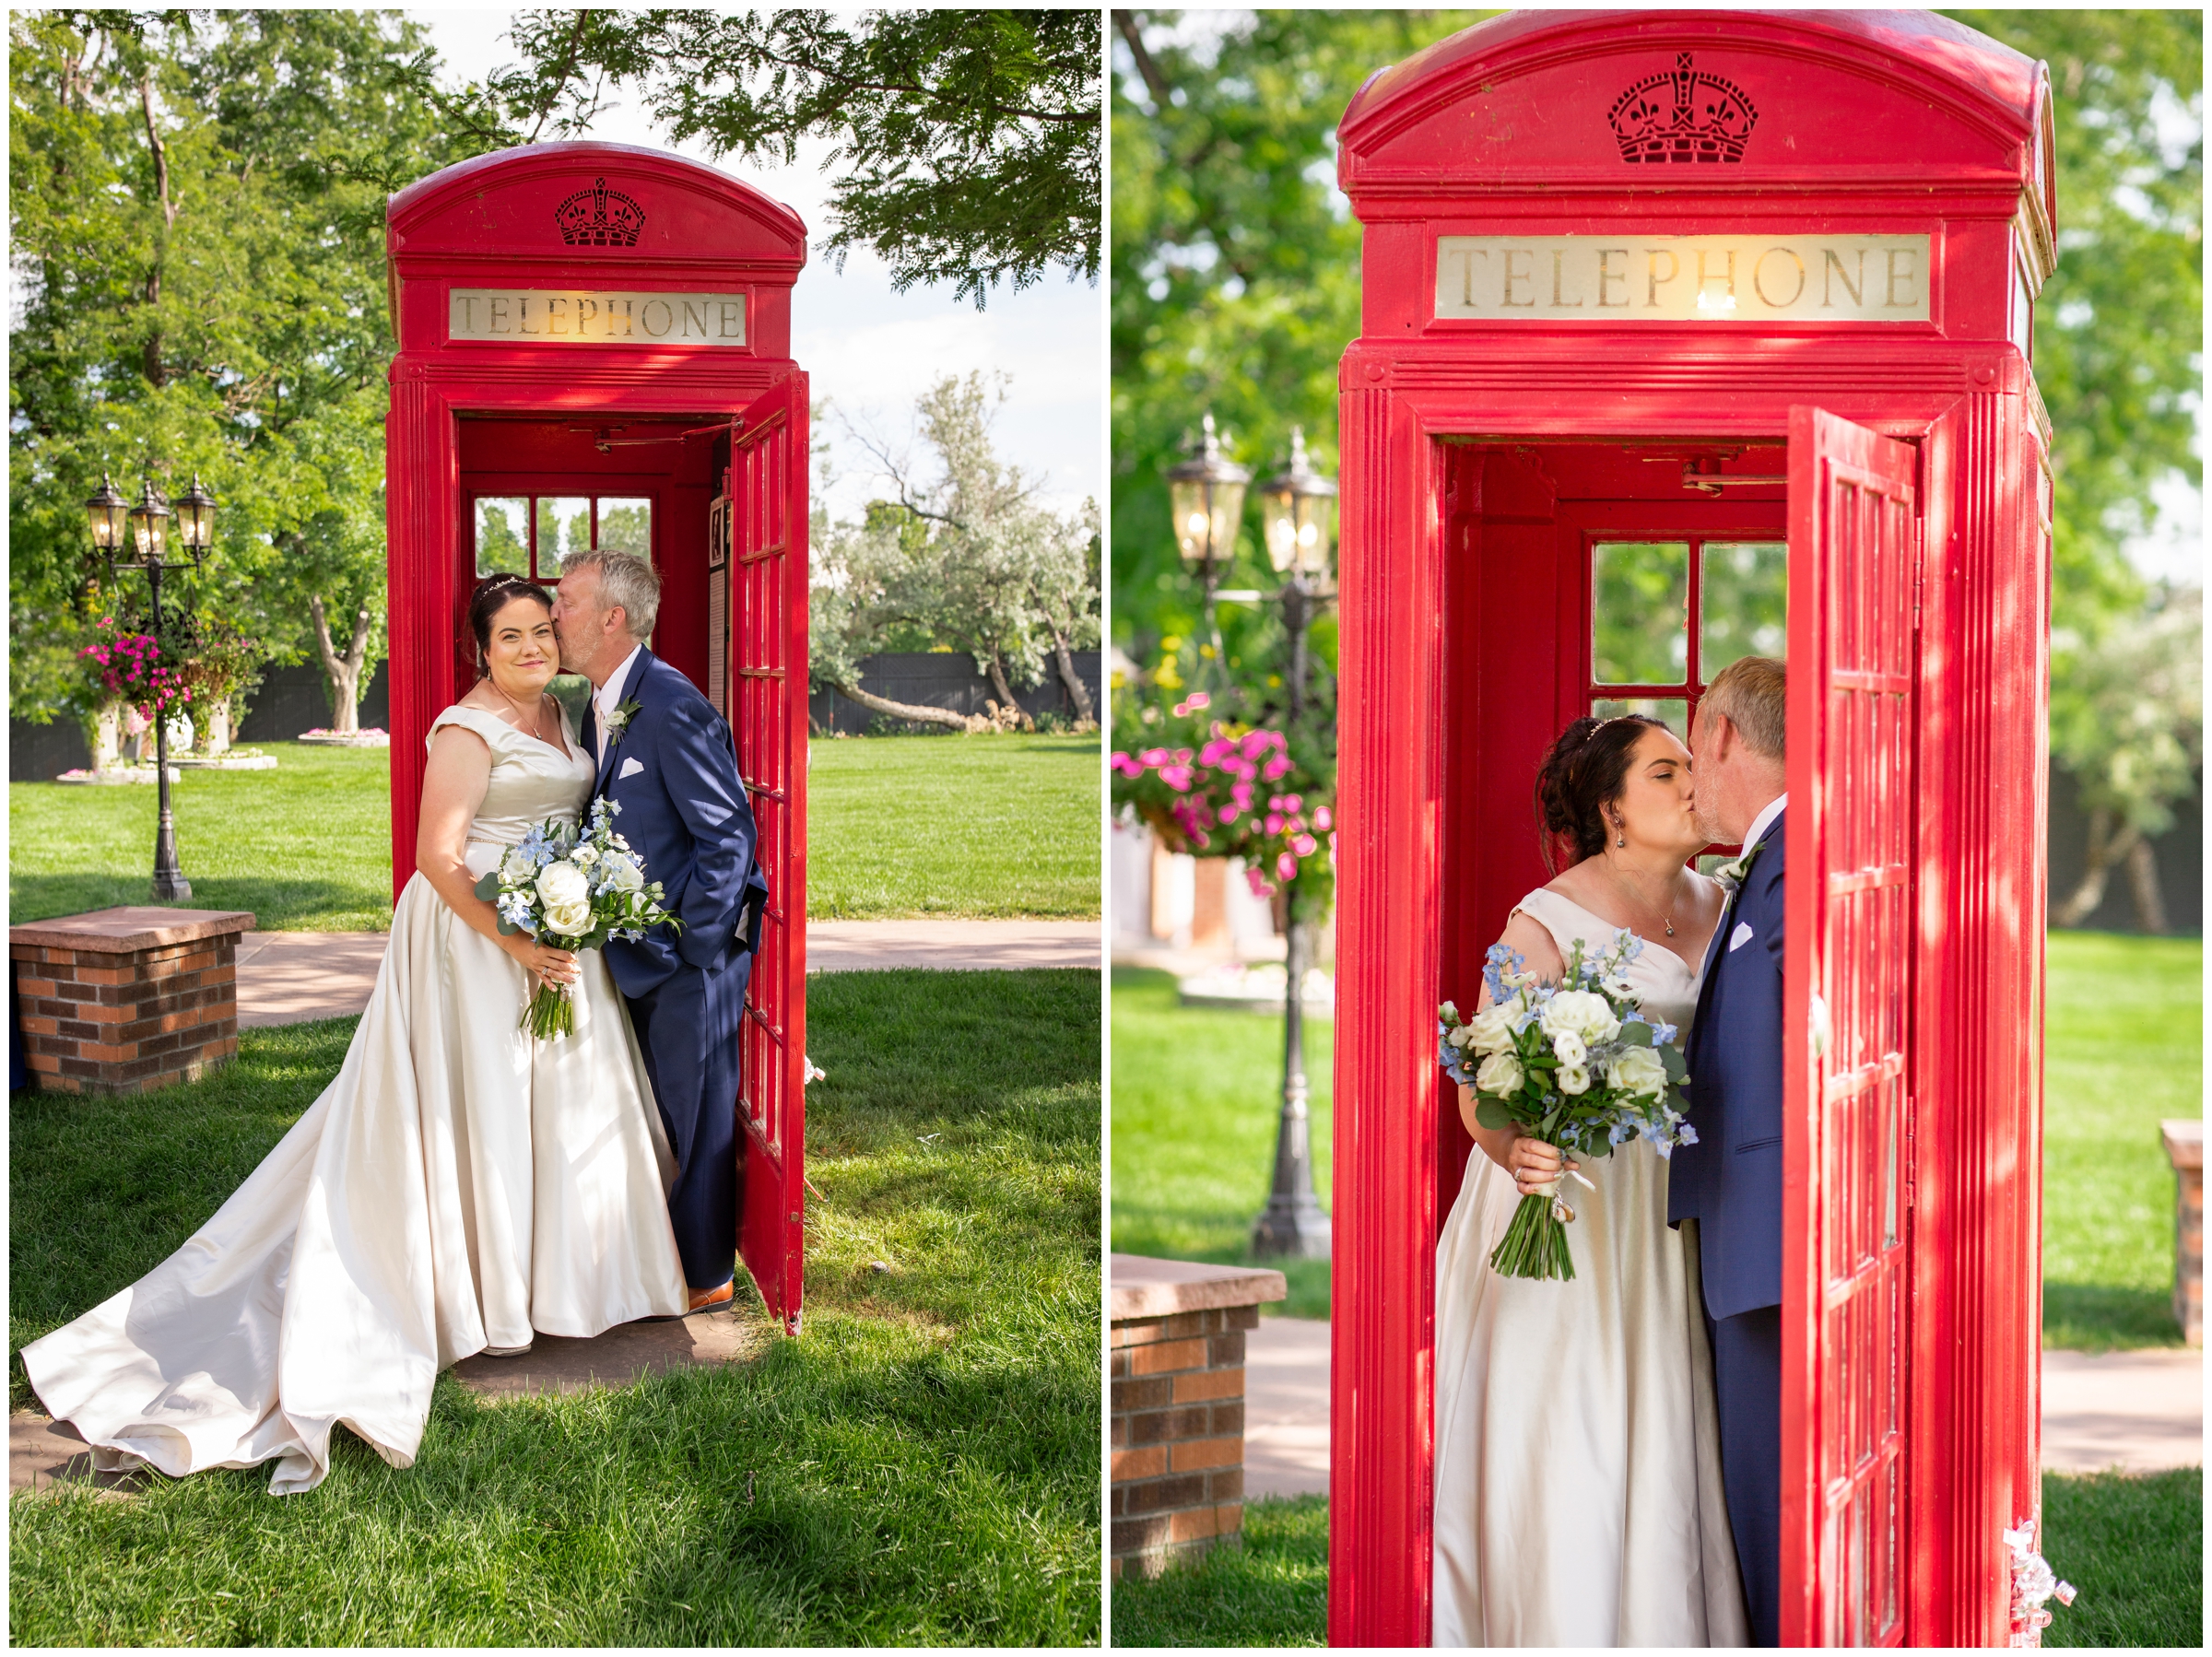 couple kissing in phone booth after wedding at the Chandelier Barn at Lionsgate Event Center